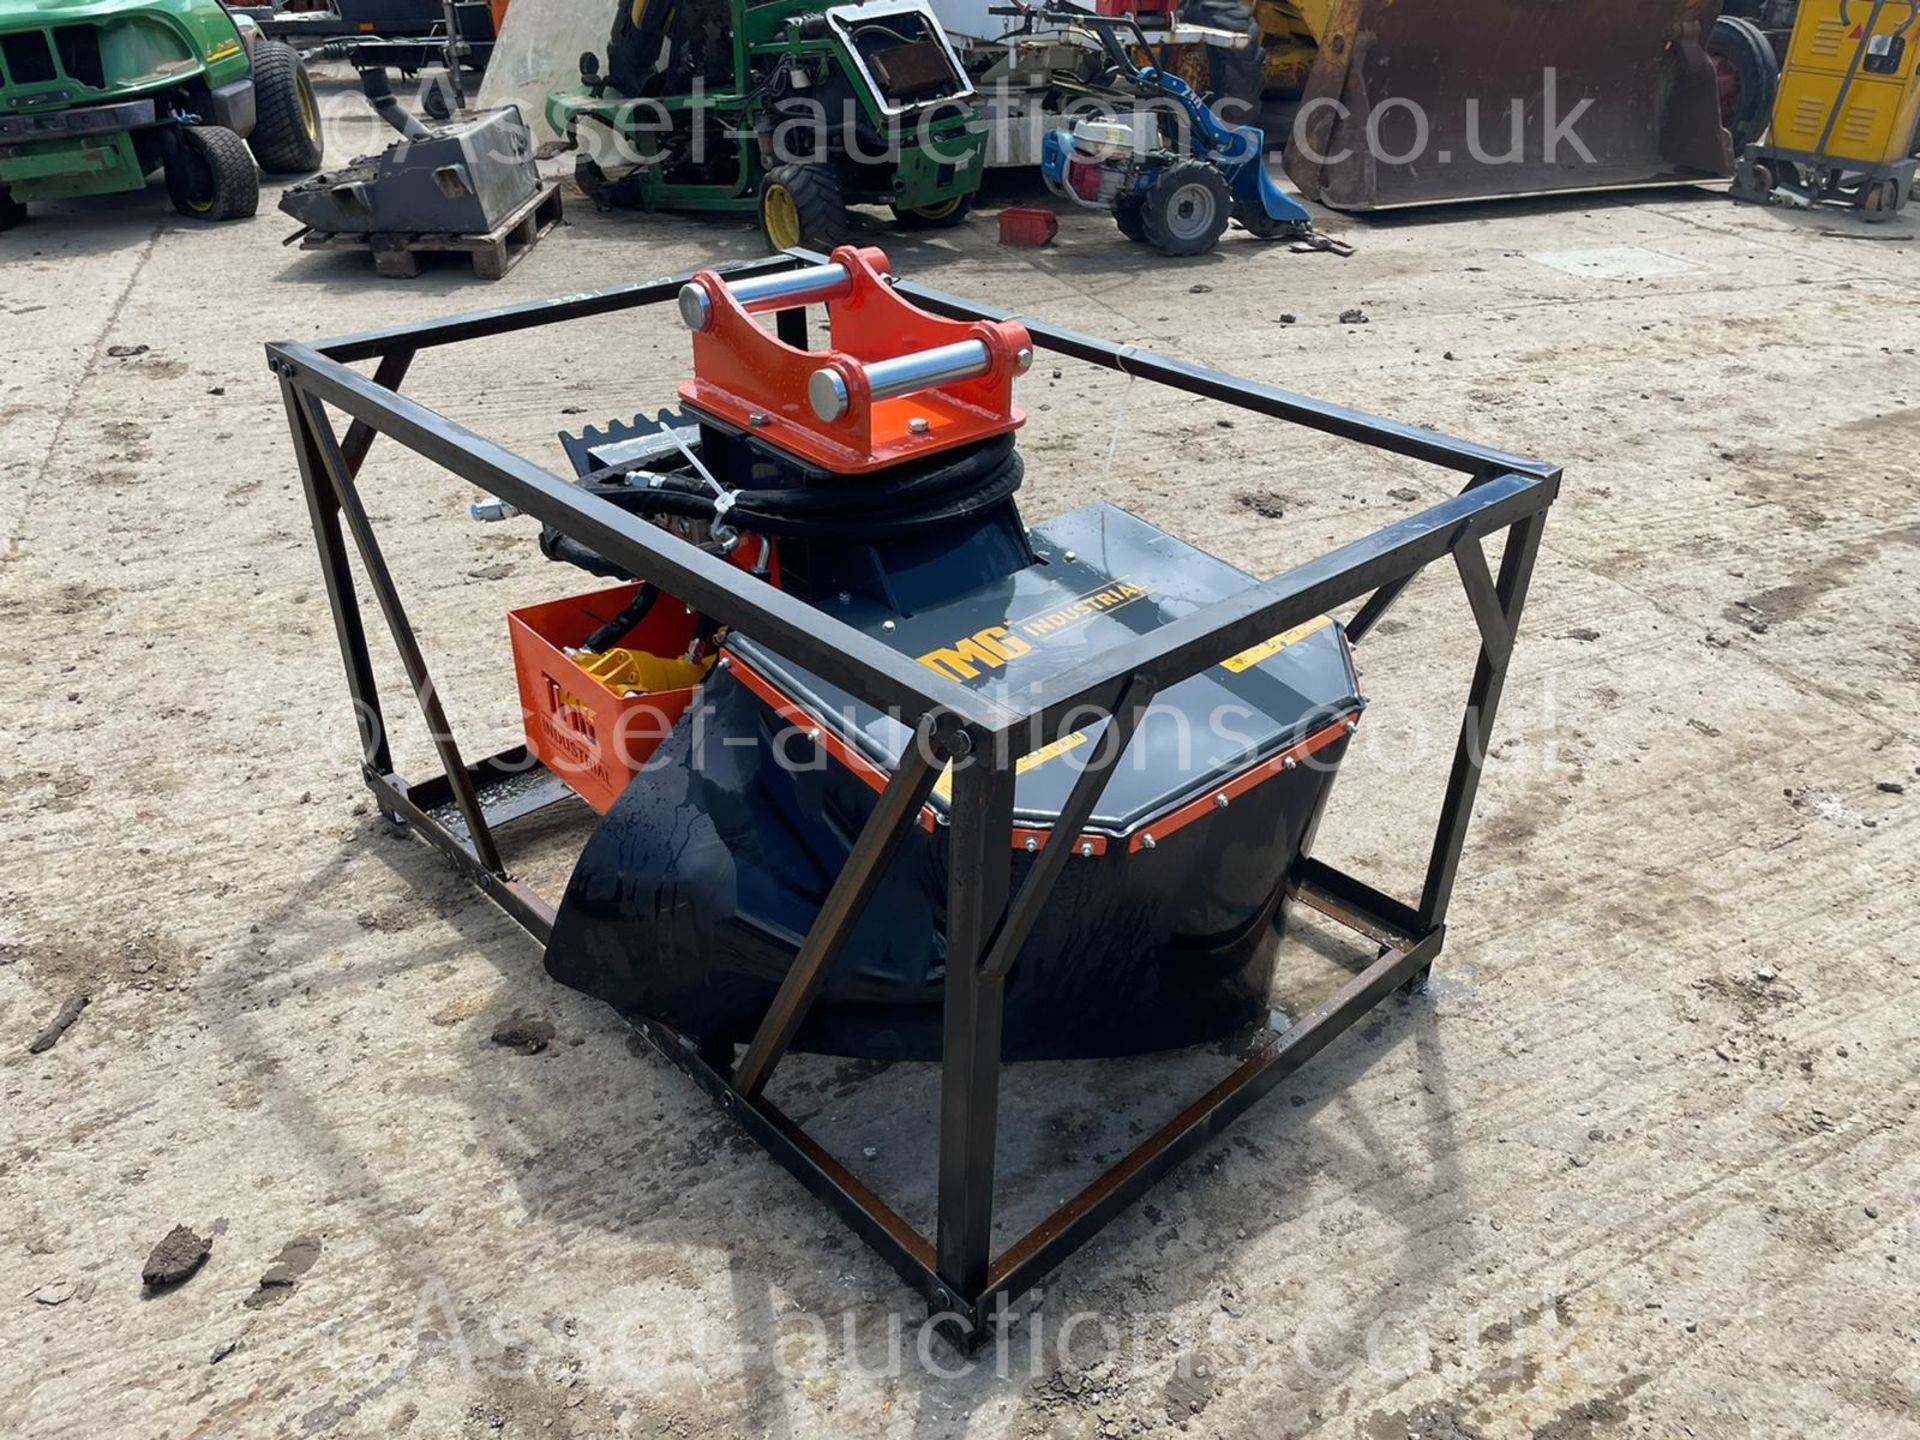 NEW AND UNUSED HEAVY DUTY 18" STUMP GRINDER, HYDRAULIC DRIVEN, 50mm PINS *PLUS VAT* - Image 3 of 16